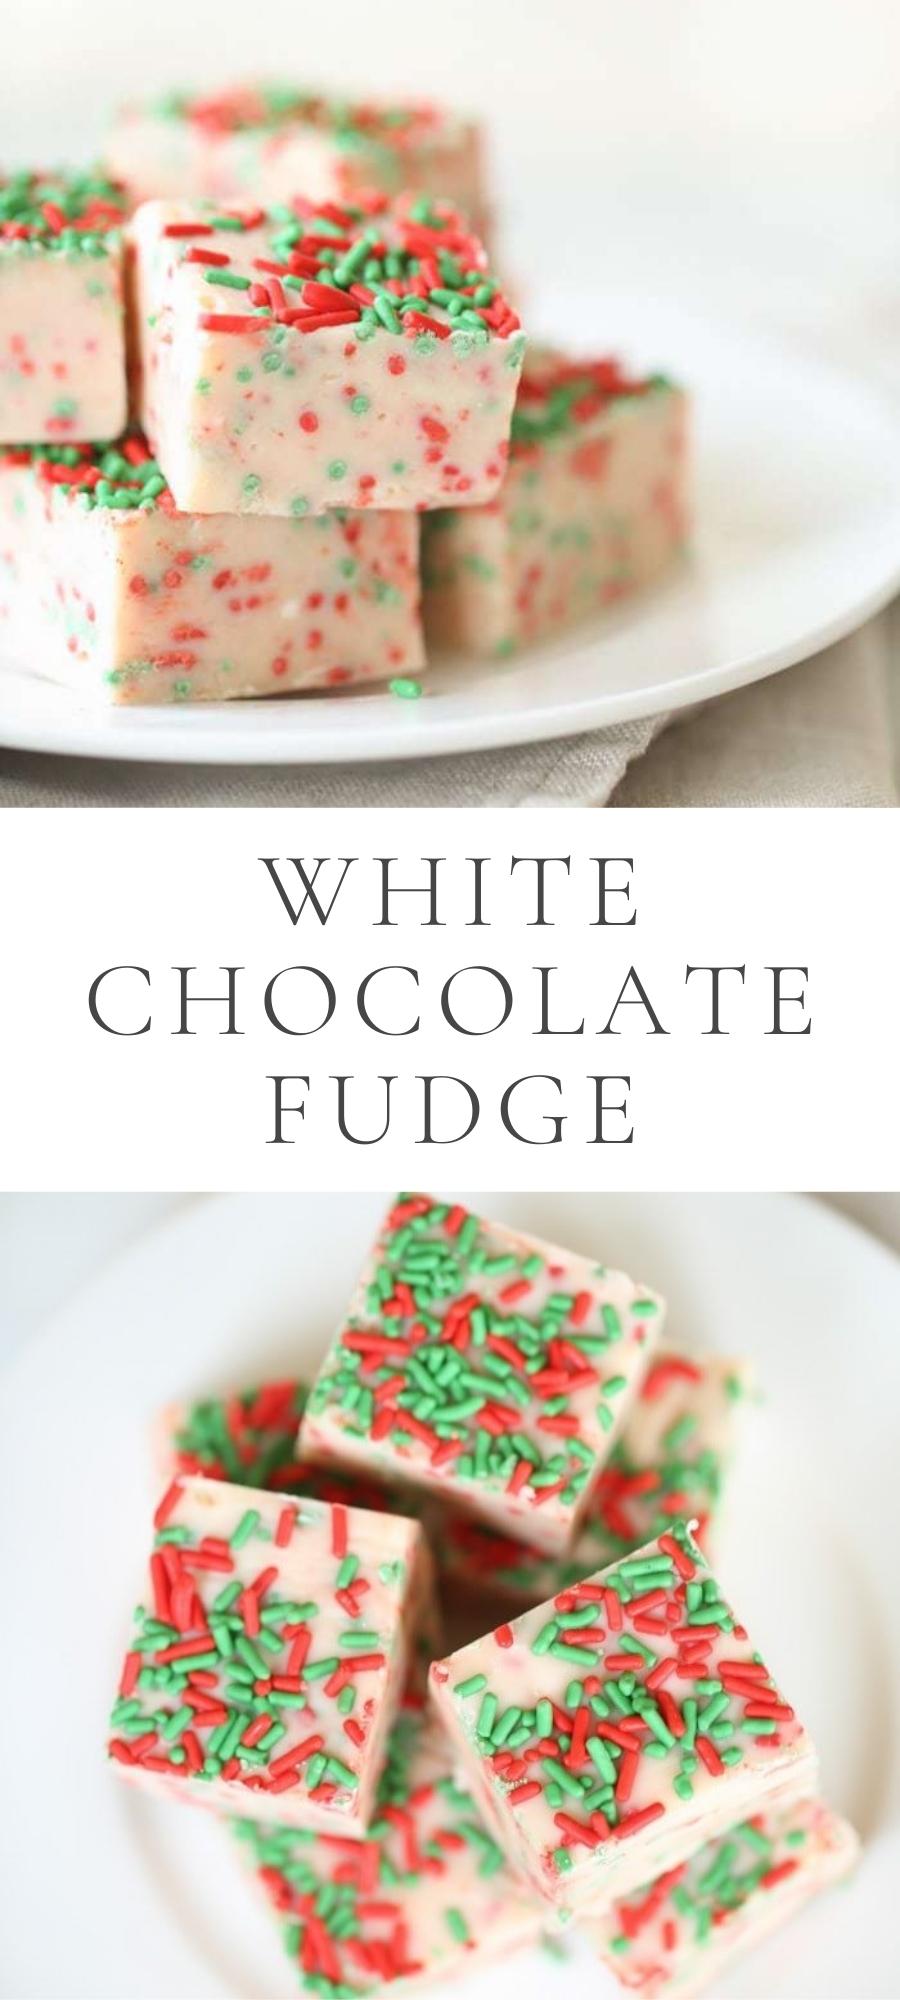 white chocolate fudge with red and green sprinkles in plate